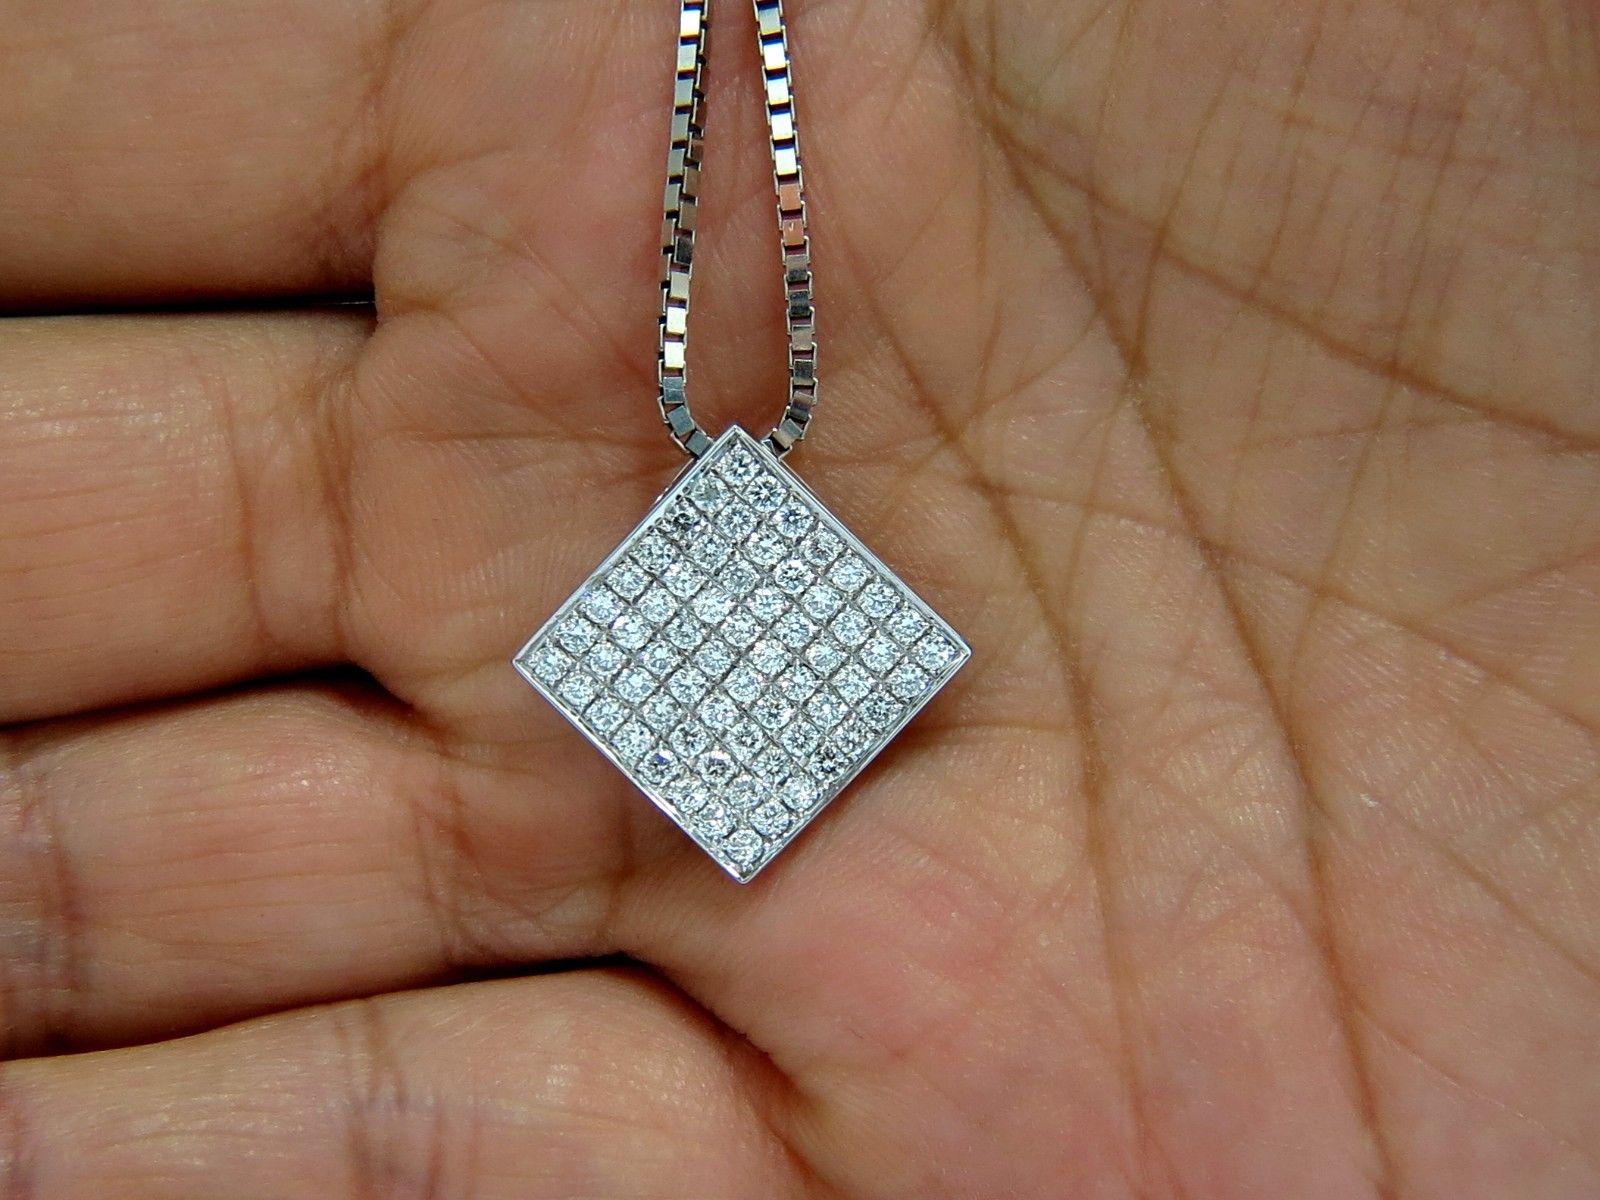 Mod Zen Deco Pendant & Chain

1.40ct. Diamonds

Micro / Bead Set

Rounds, Full cuts 

 G color, Vs-2 clarity. 

Very Good, Excellent cuts. 

Selected from the finest parcels. 


14KT Solid white gold 

Form of a Zen Plate with 3D curve on